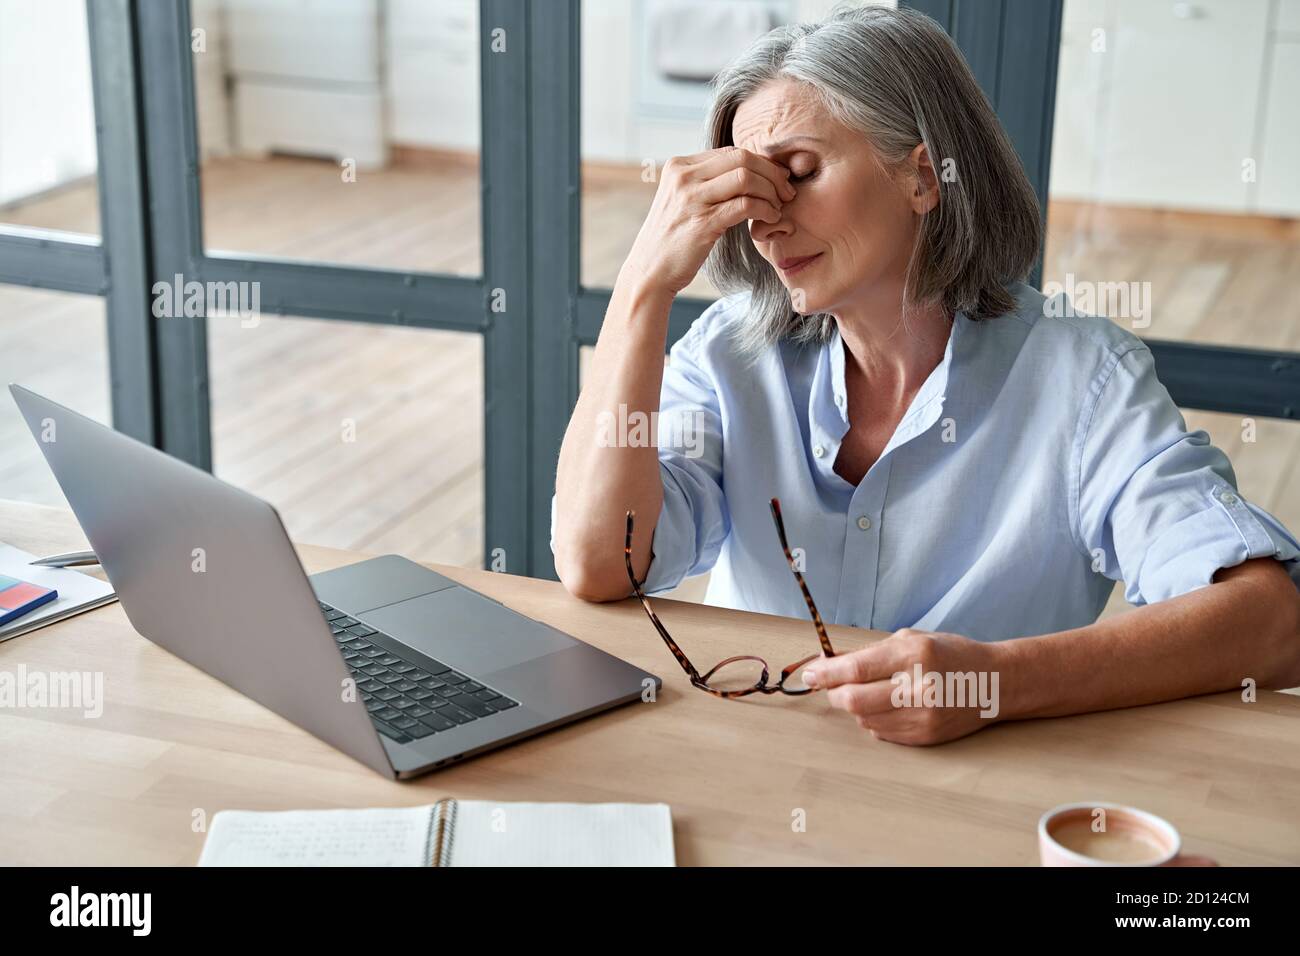 Overworked tired old lady holding glasses feeling headache after computer work. Stock Photo